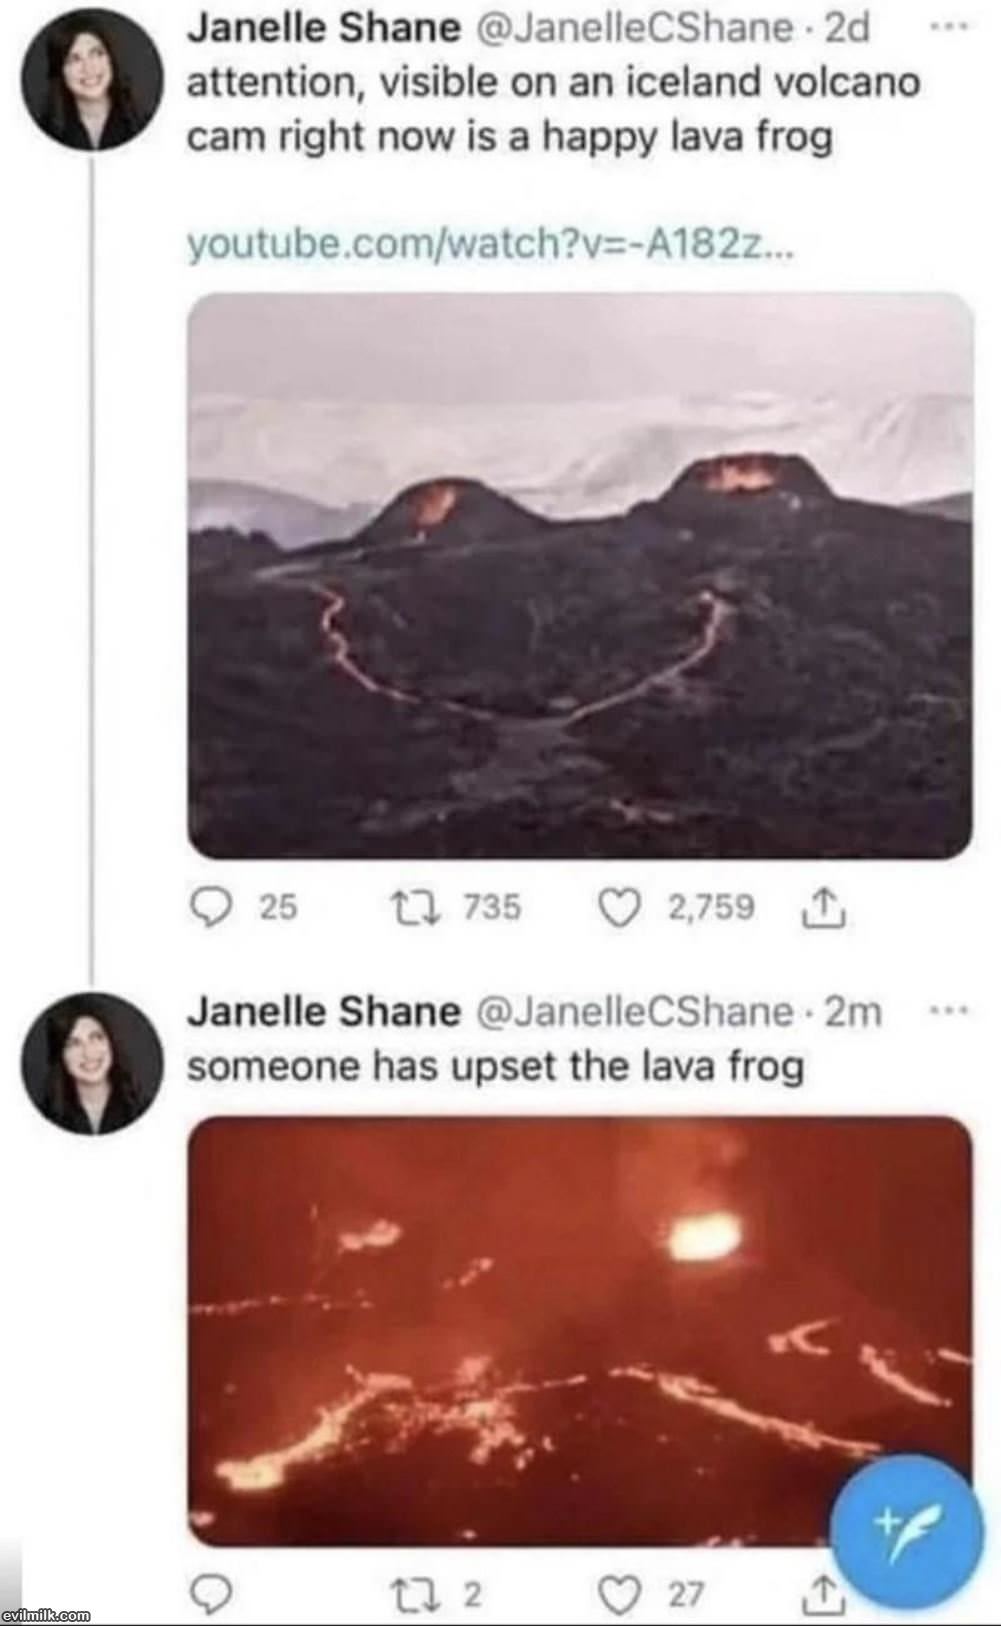 The Lava Frog